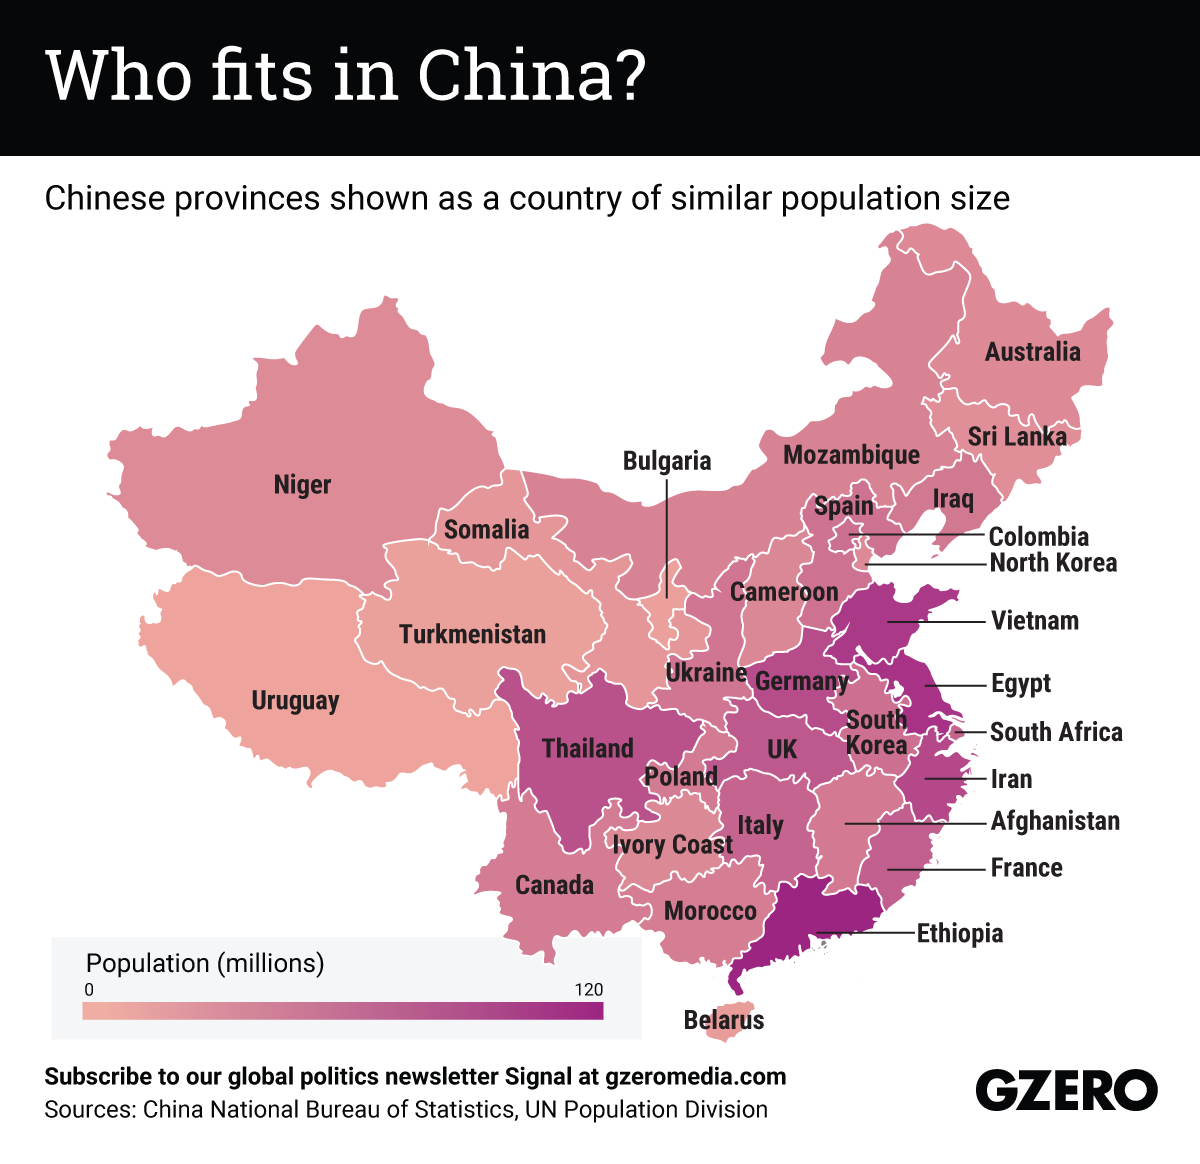 The Graphic Truth: Who fits in China? Chinese provinces shown as a country of similar population size